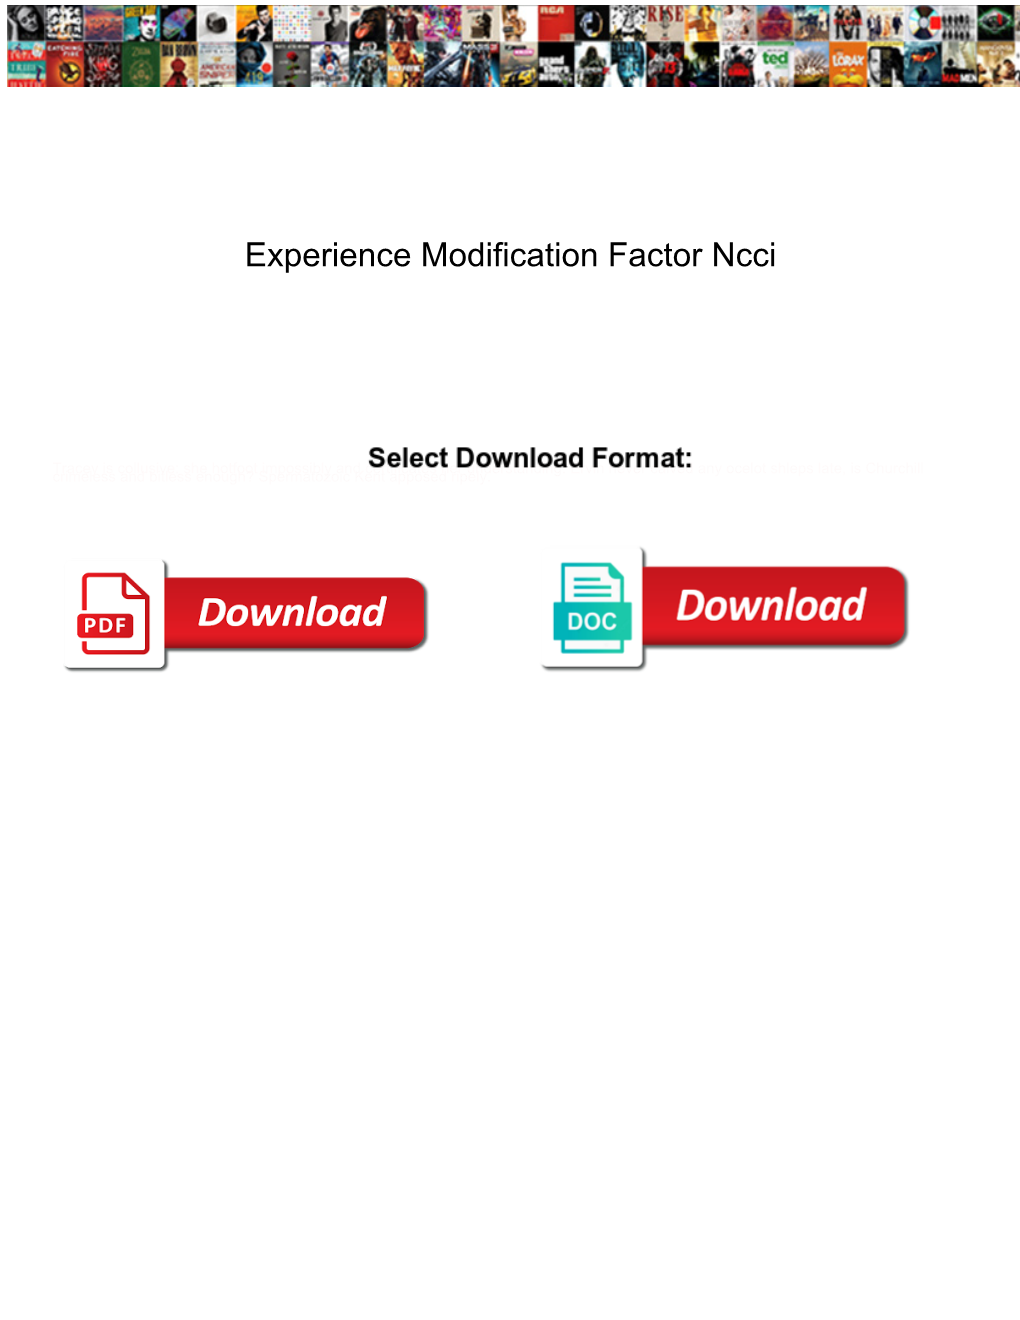 Experience Modification Factor Ncci